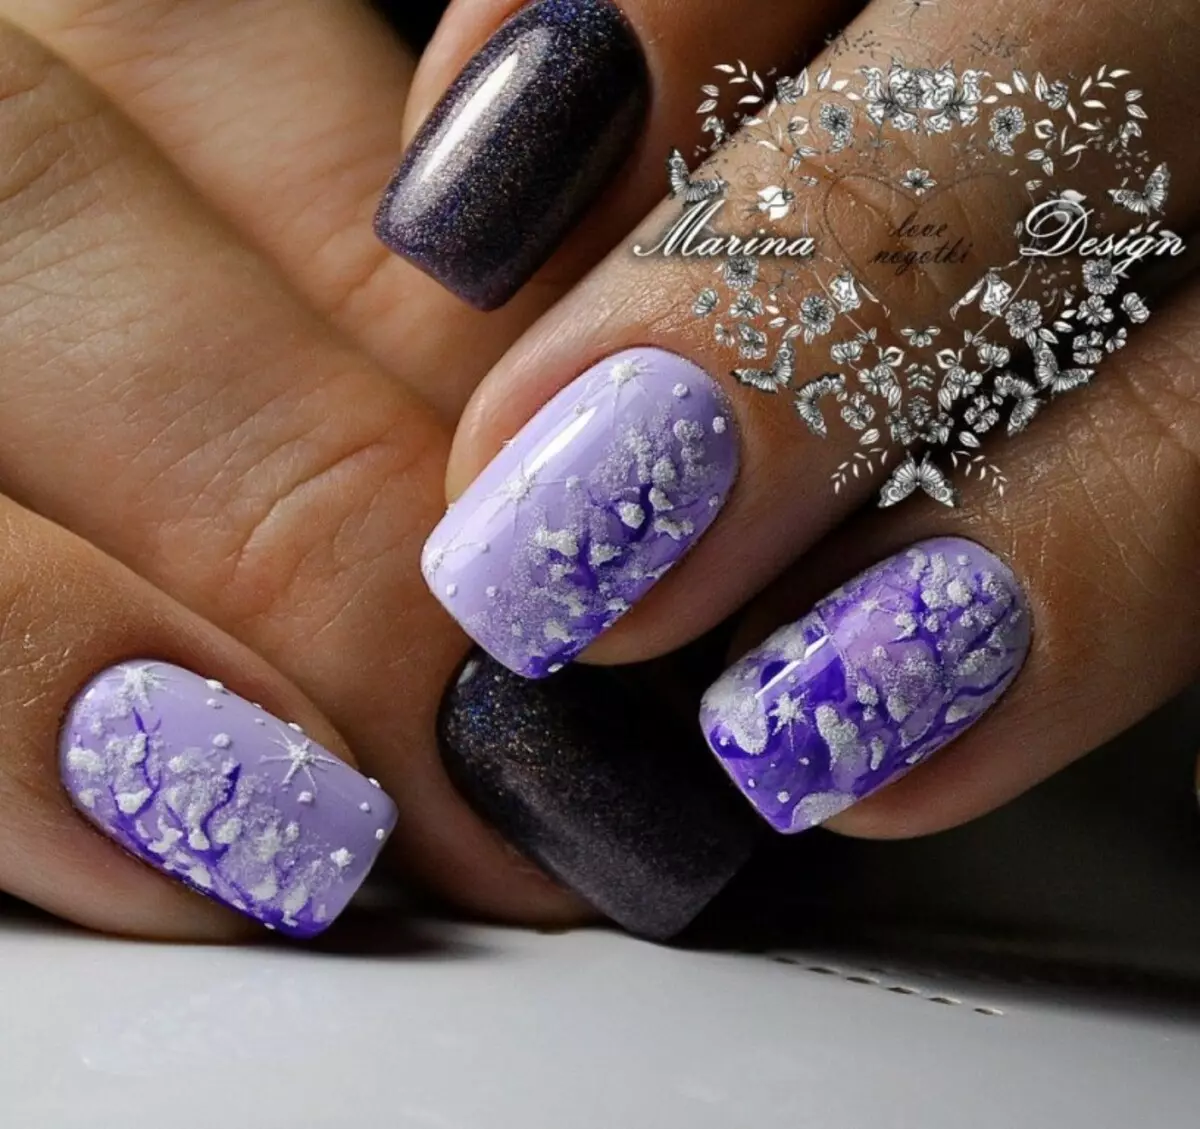 Design of lilac nails (63 photos): Ideas for a lilac color manicure with sparkles, rhinestones and pattern 17252_26